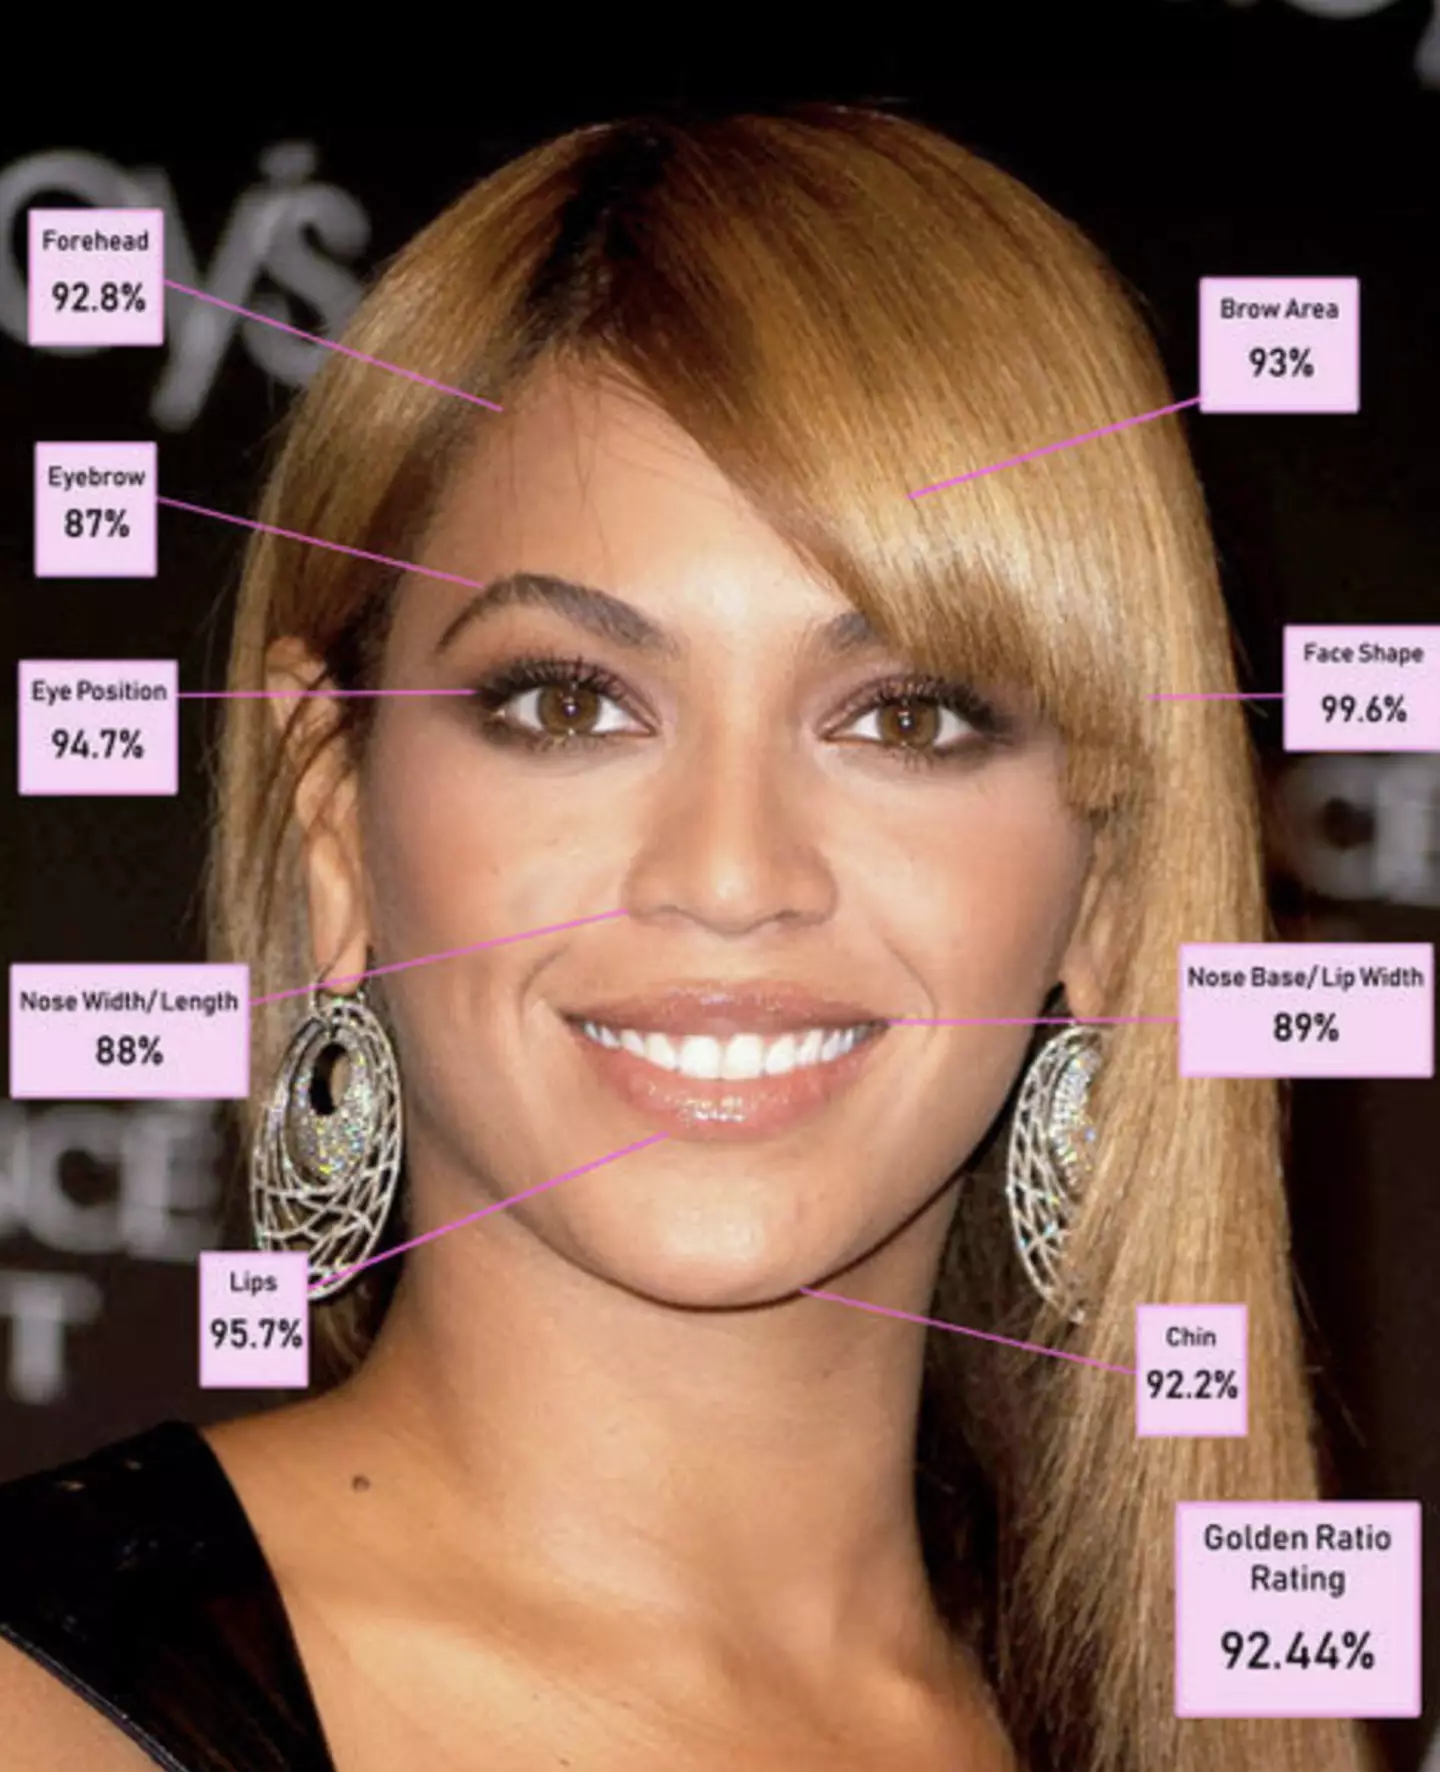 Beyonce, the Queen bee, came in fifth.